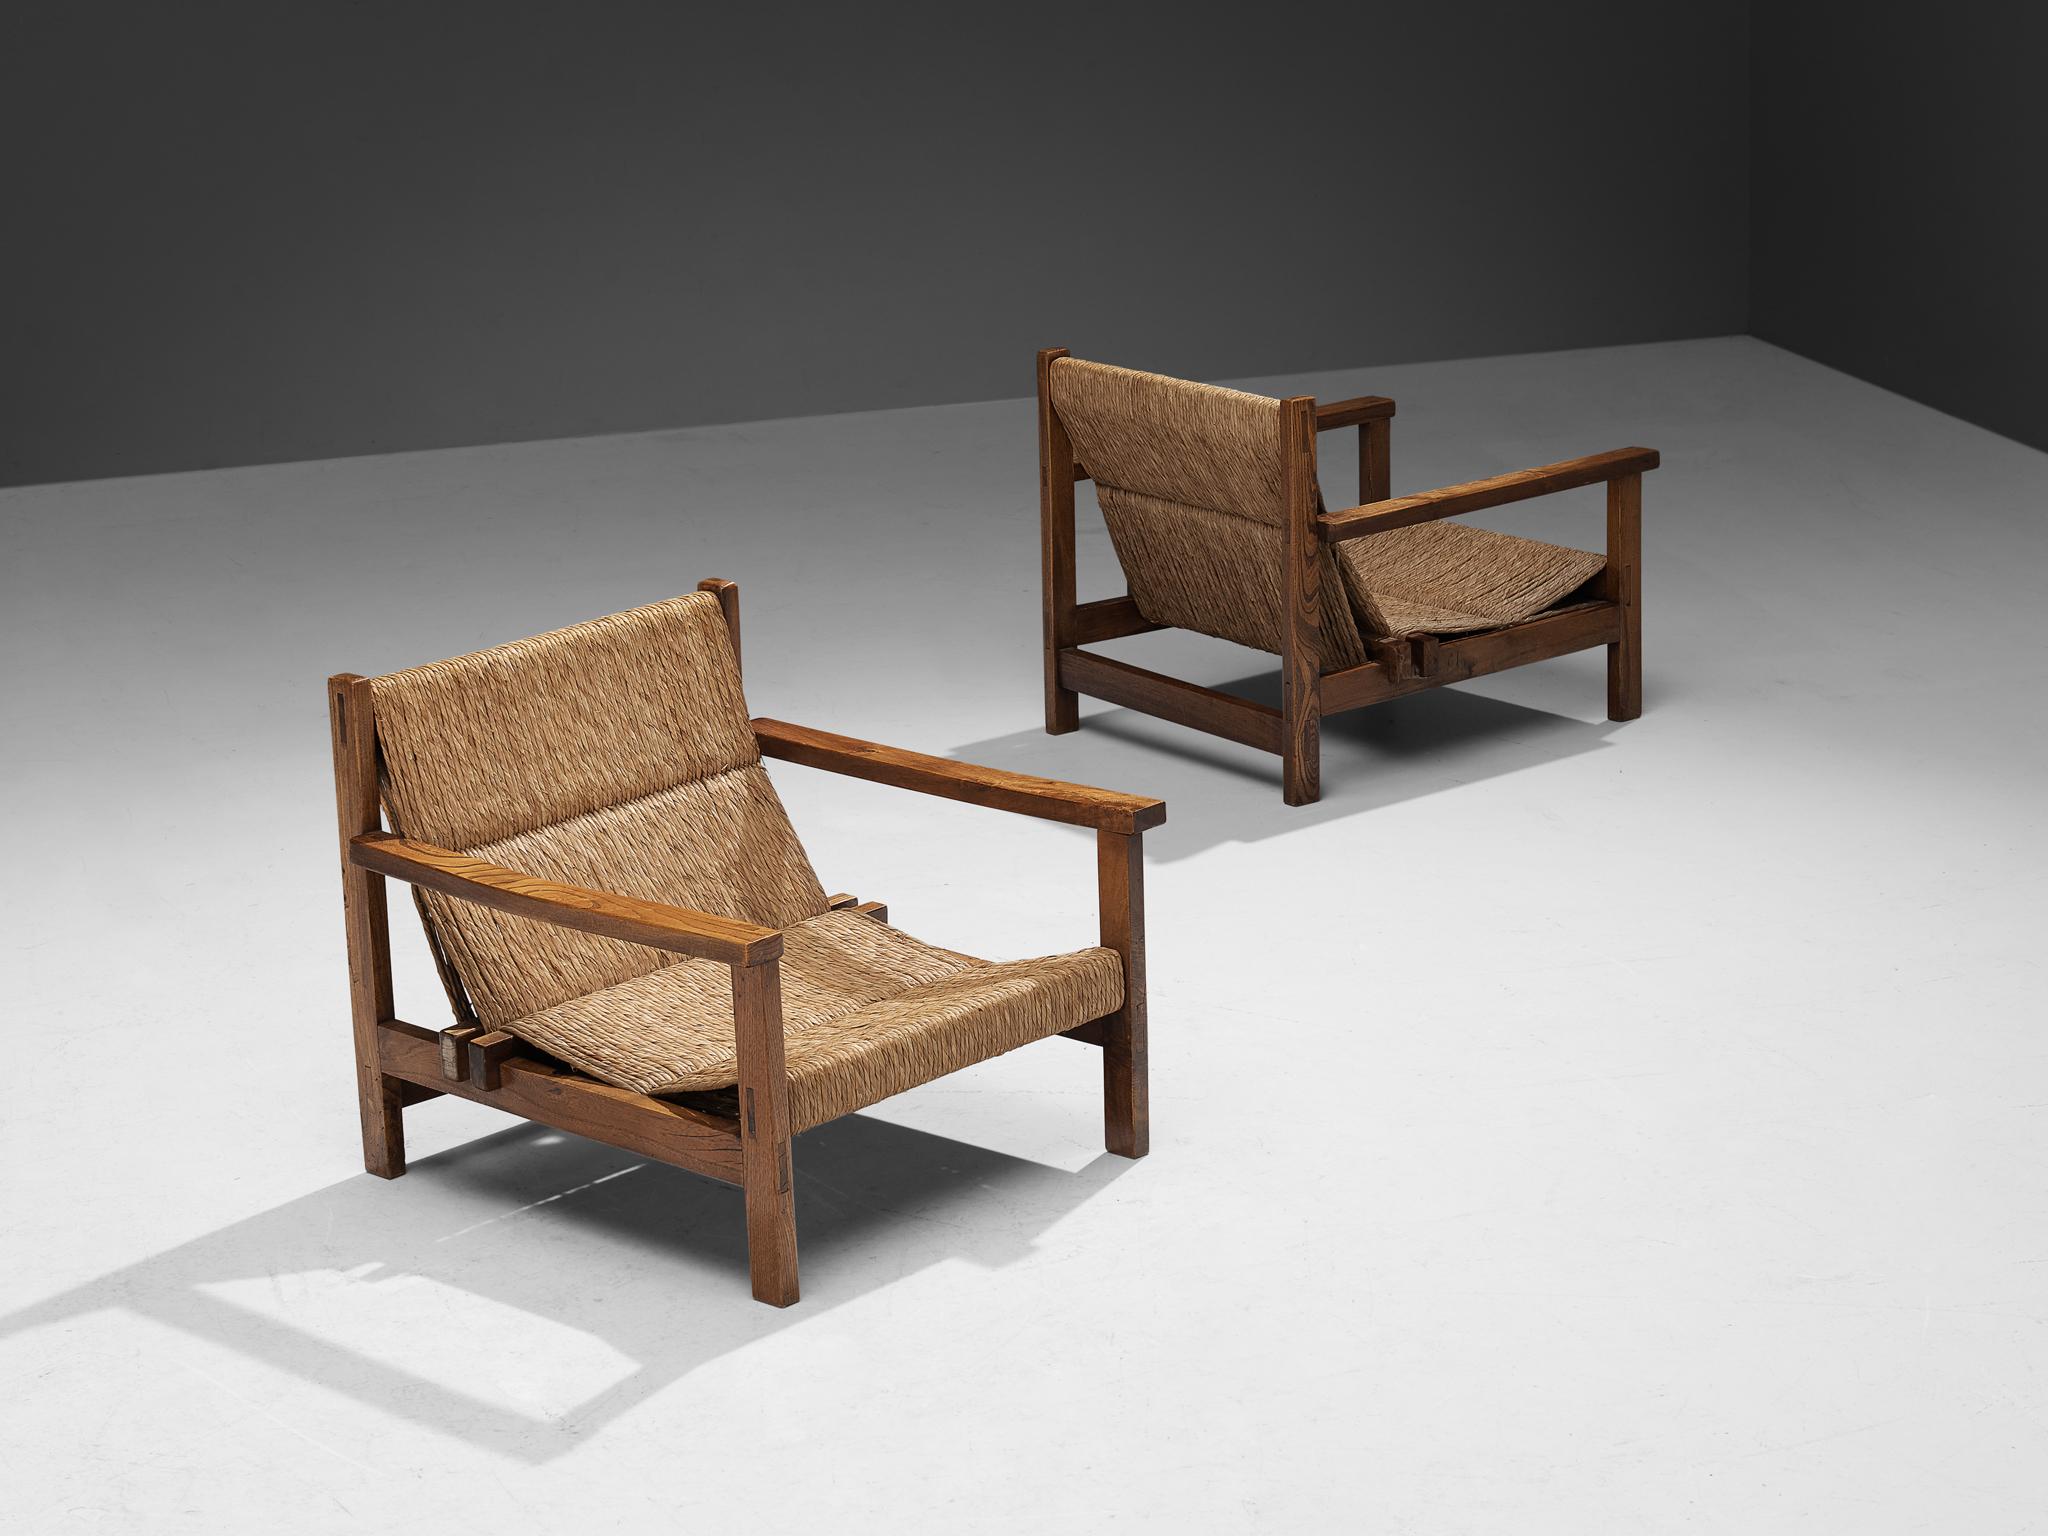 Pair of armchairs, stained elm, straw, Spain, 1950s.

These beautifully constructed armchairs conceal an evolved rustic character with great quality of elegance. The wooden frame features a solid construction of straight lines and round corners.